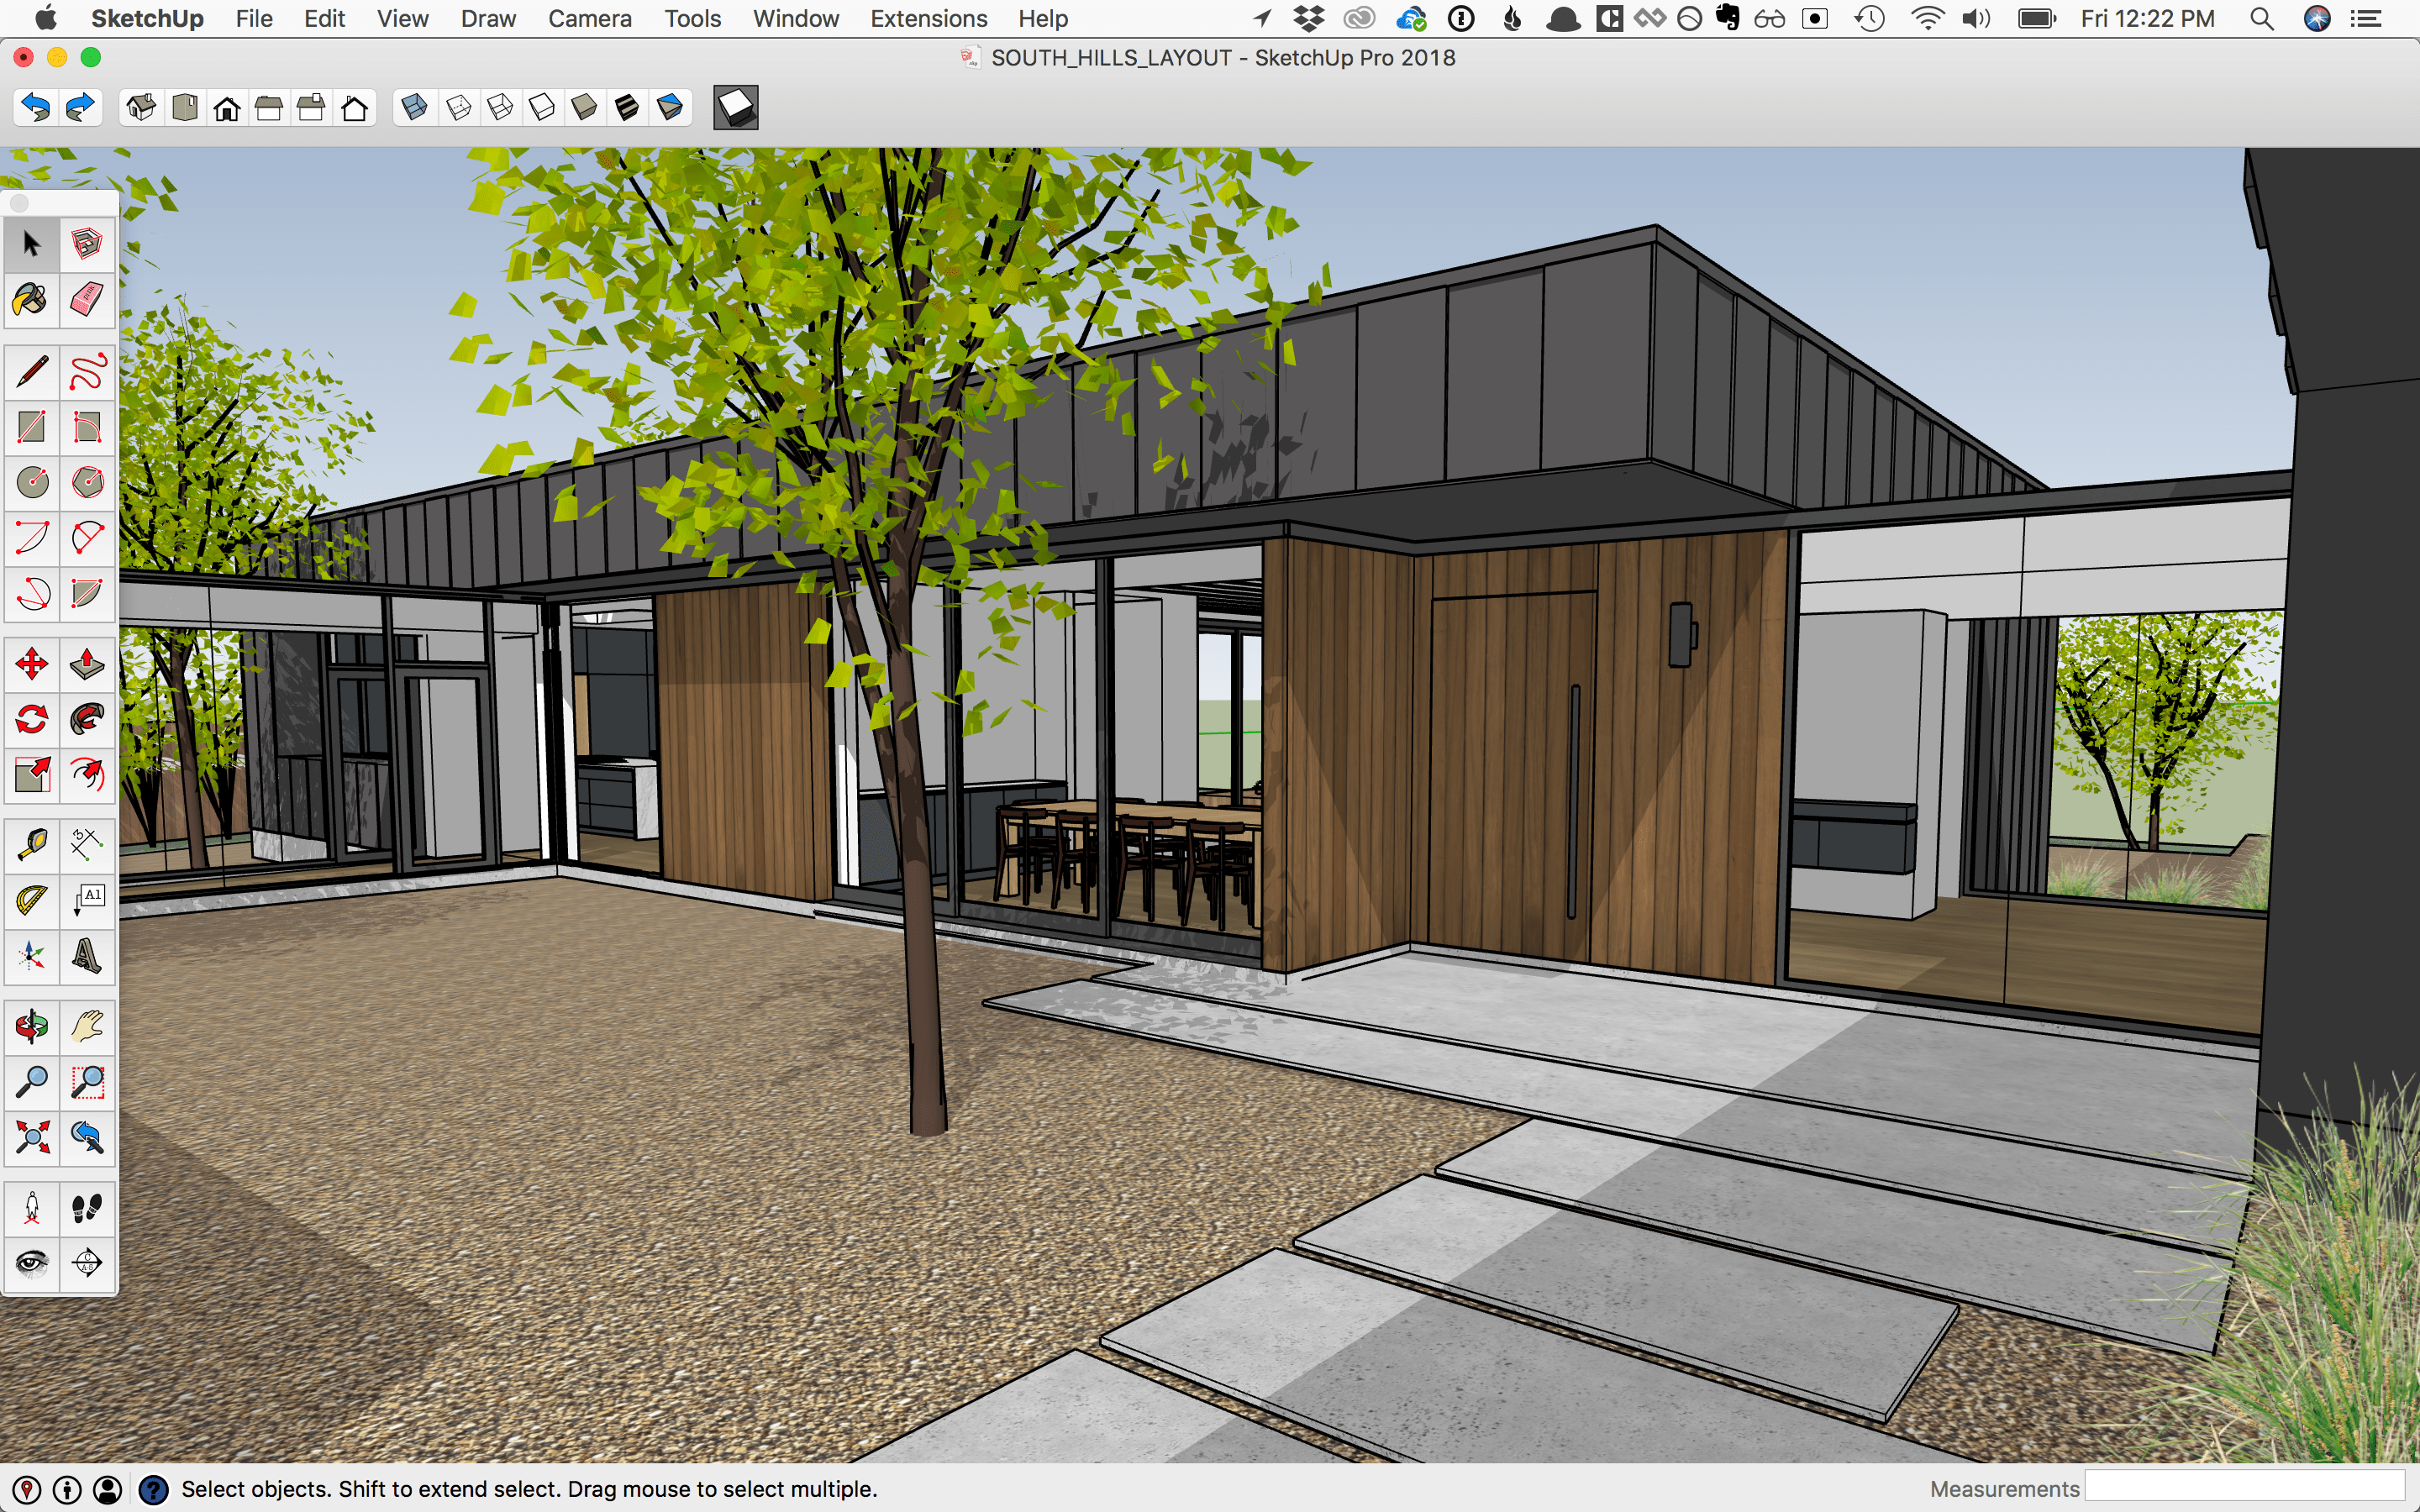 sketchup pro 2018 trial